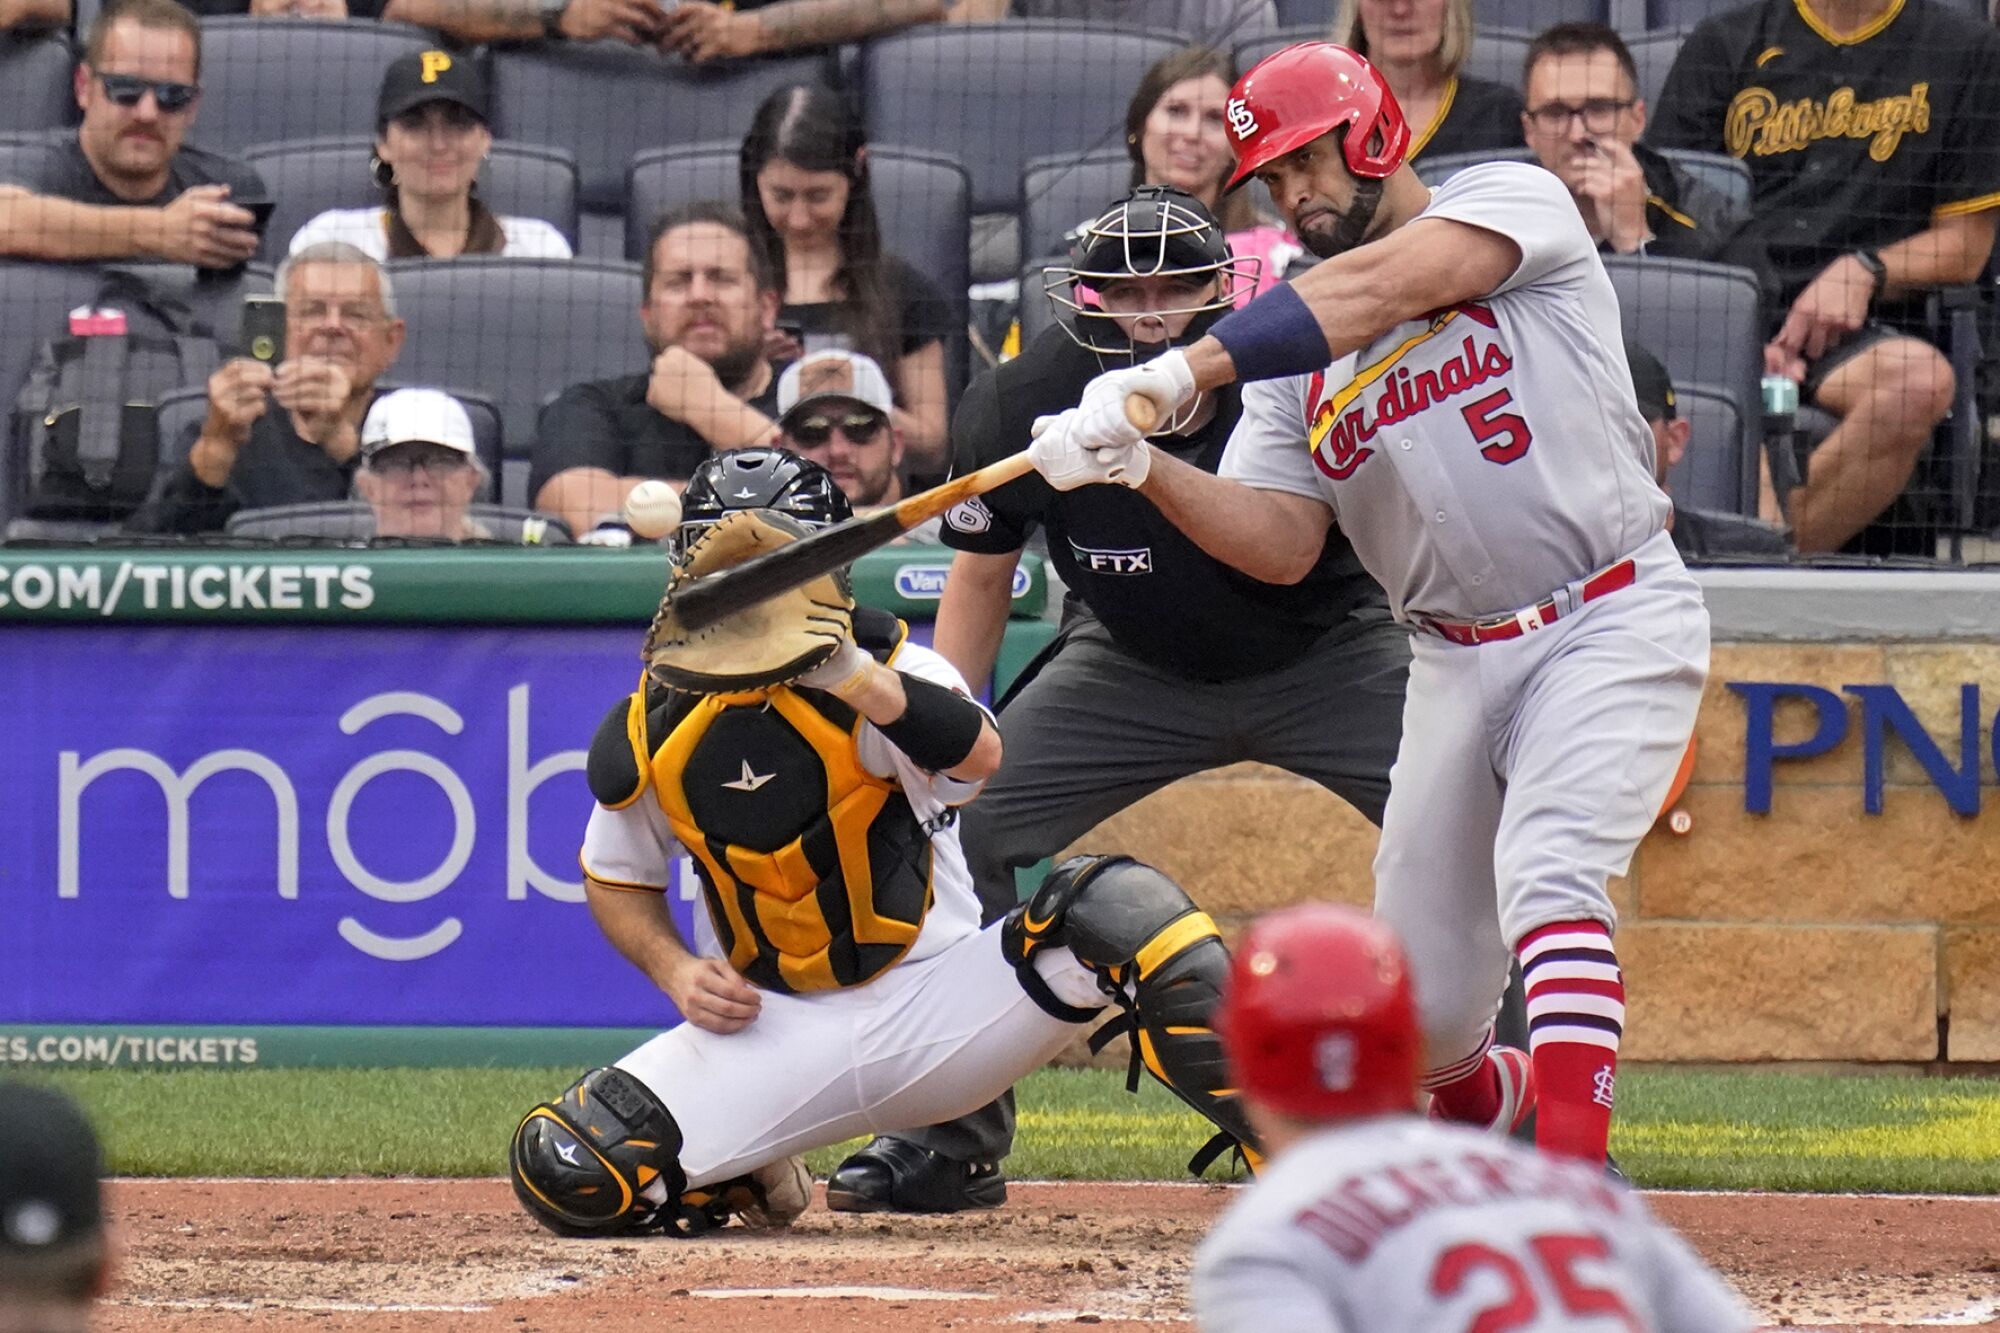 St. Louis Cardinals slugger Albert Pujols hits a two-run home run off Pittsburgh Pirates relief pitcher Chase De Jong.